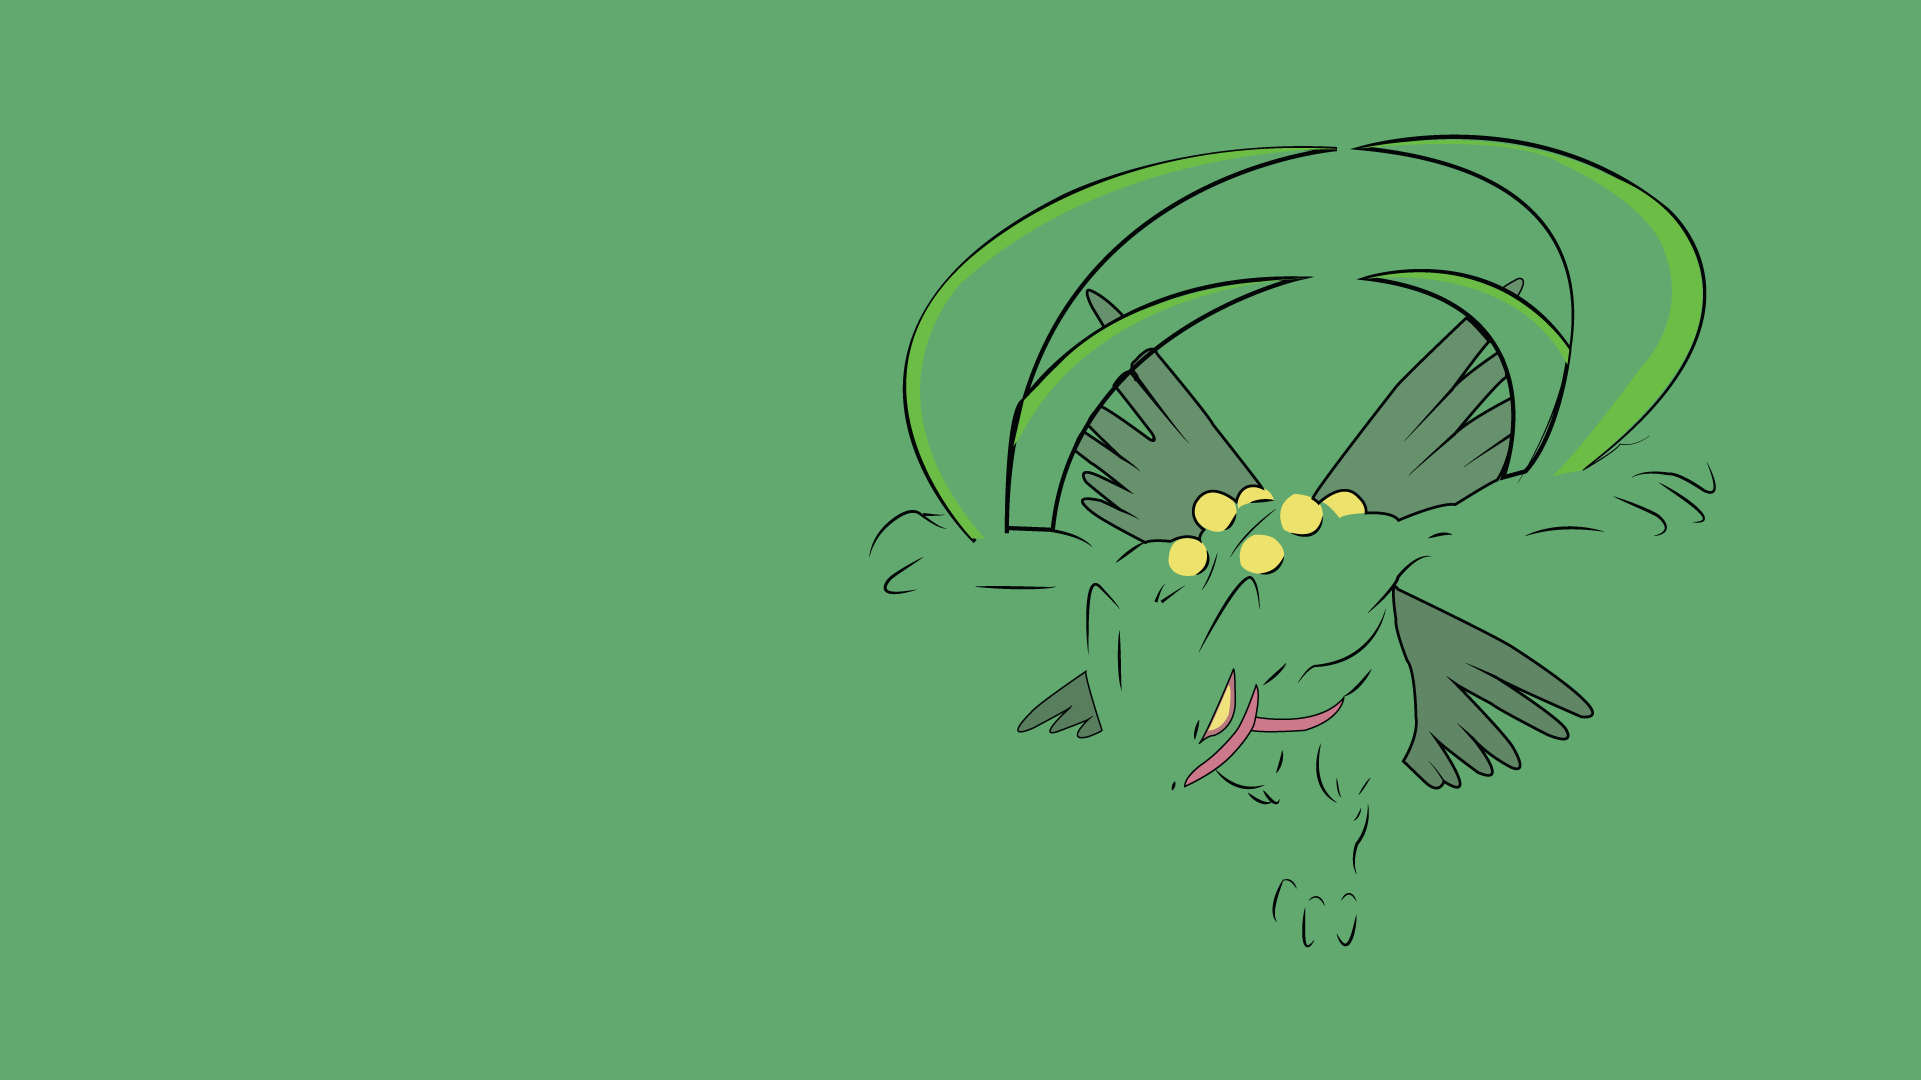 You all loved Blaziken, so here is Sceptile!